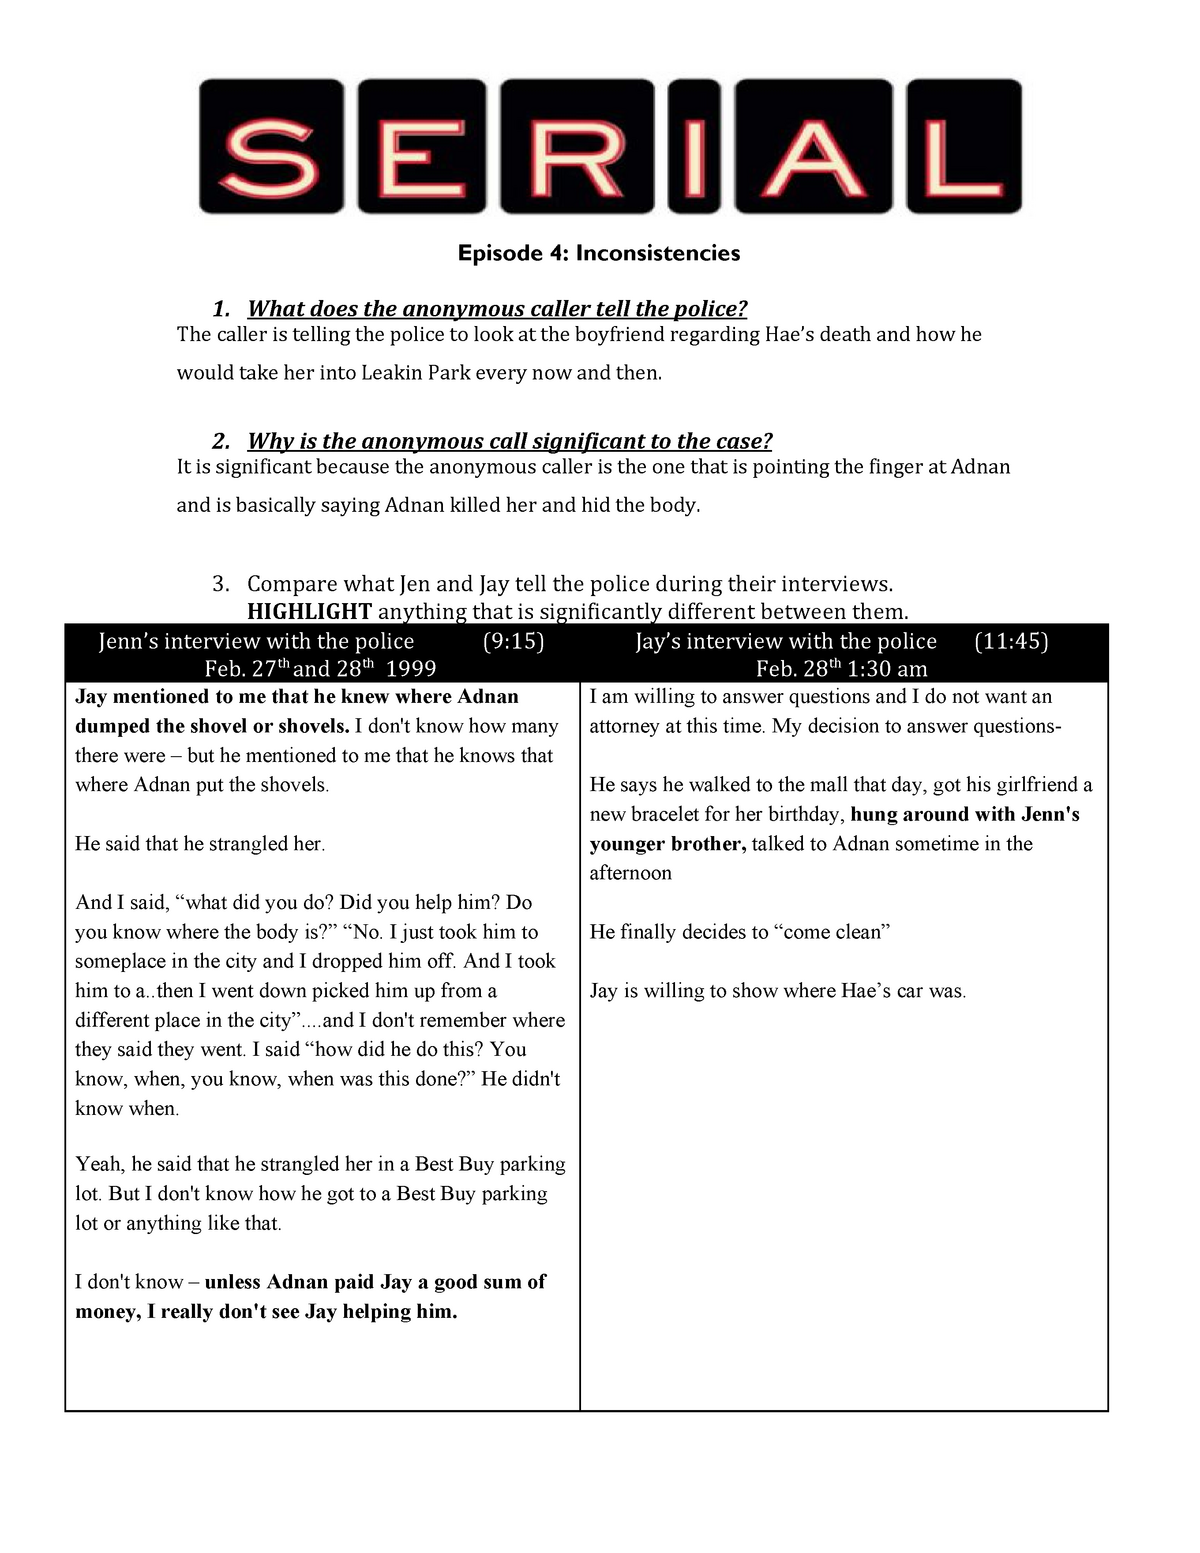 serial podcast episode 4 worksheet answers